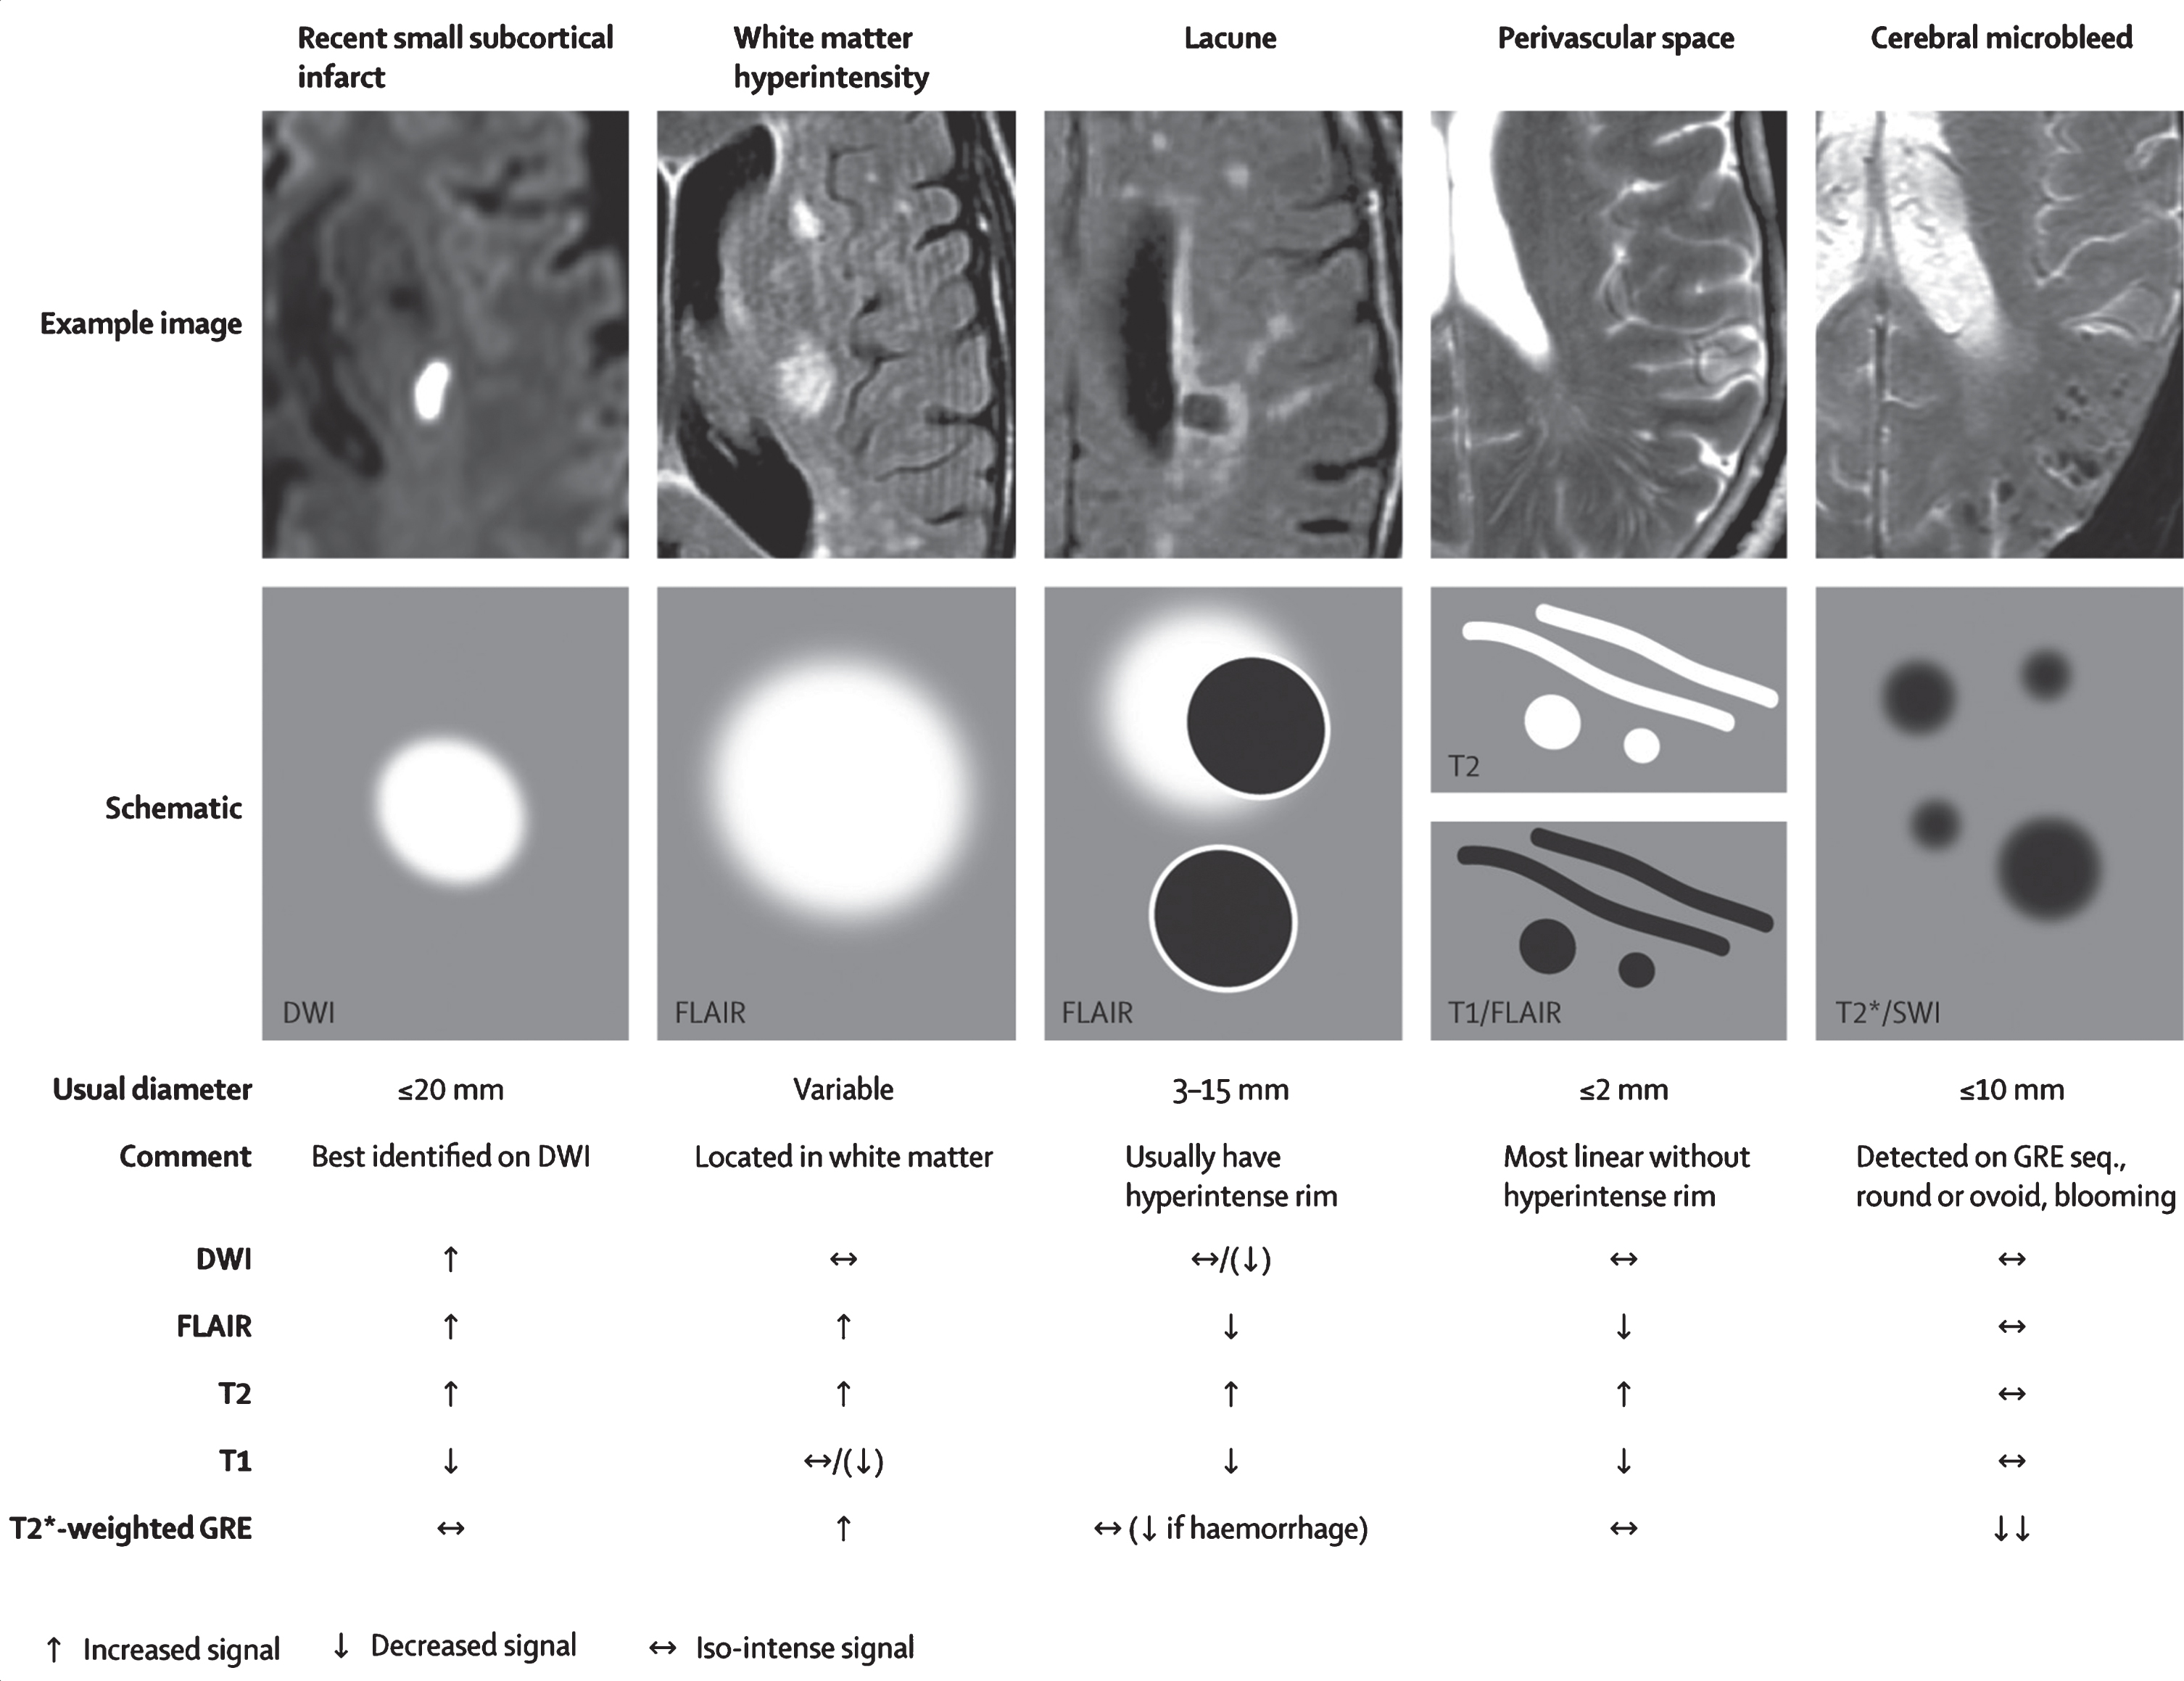 Examples of different features of small vessel disease, including white matter hyperintensities, as published by the STandards for ReportIng Vascular changes on nEuroimaging (STRIVE) study group. From: Wardlaw et al., 2013 [145].